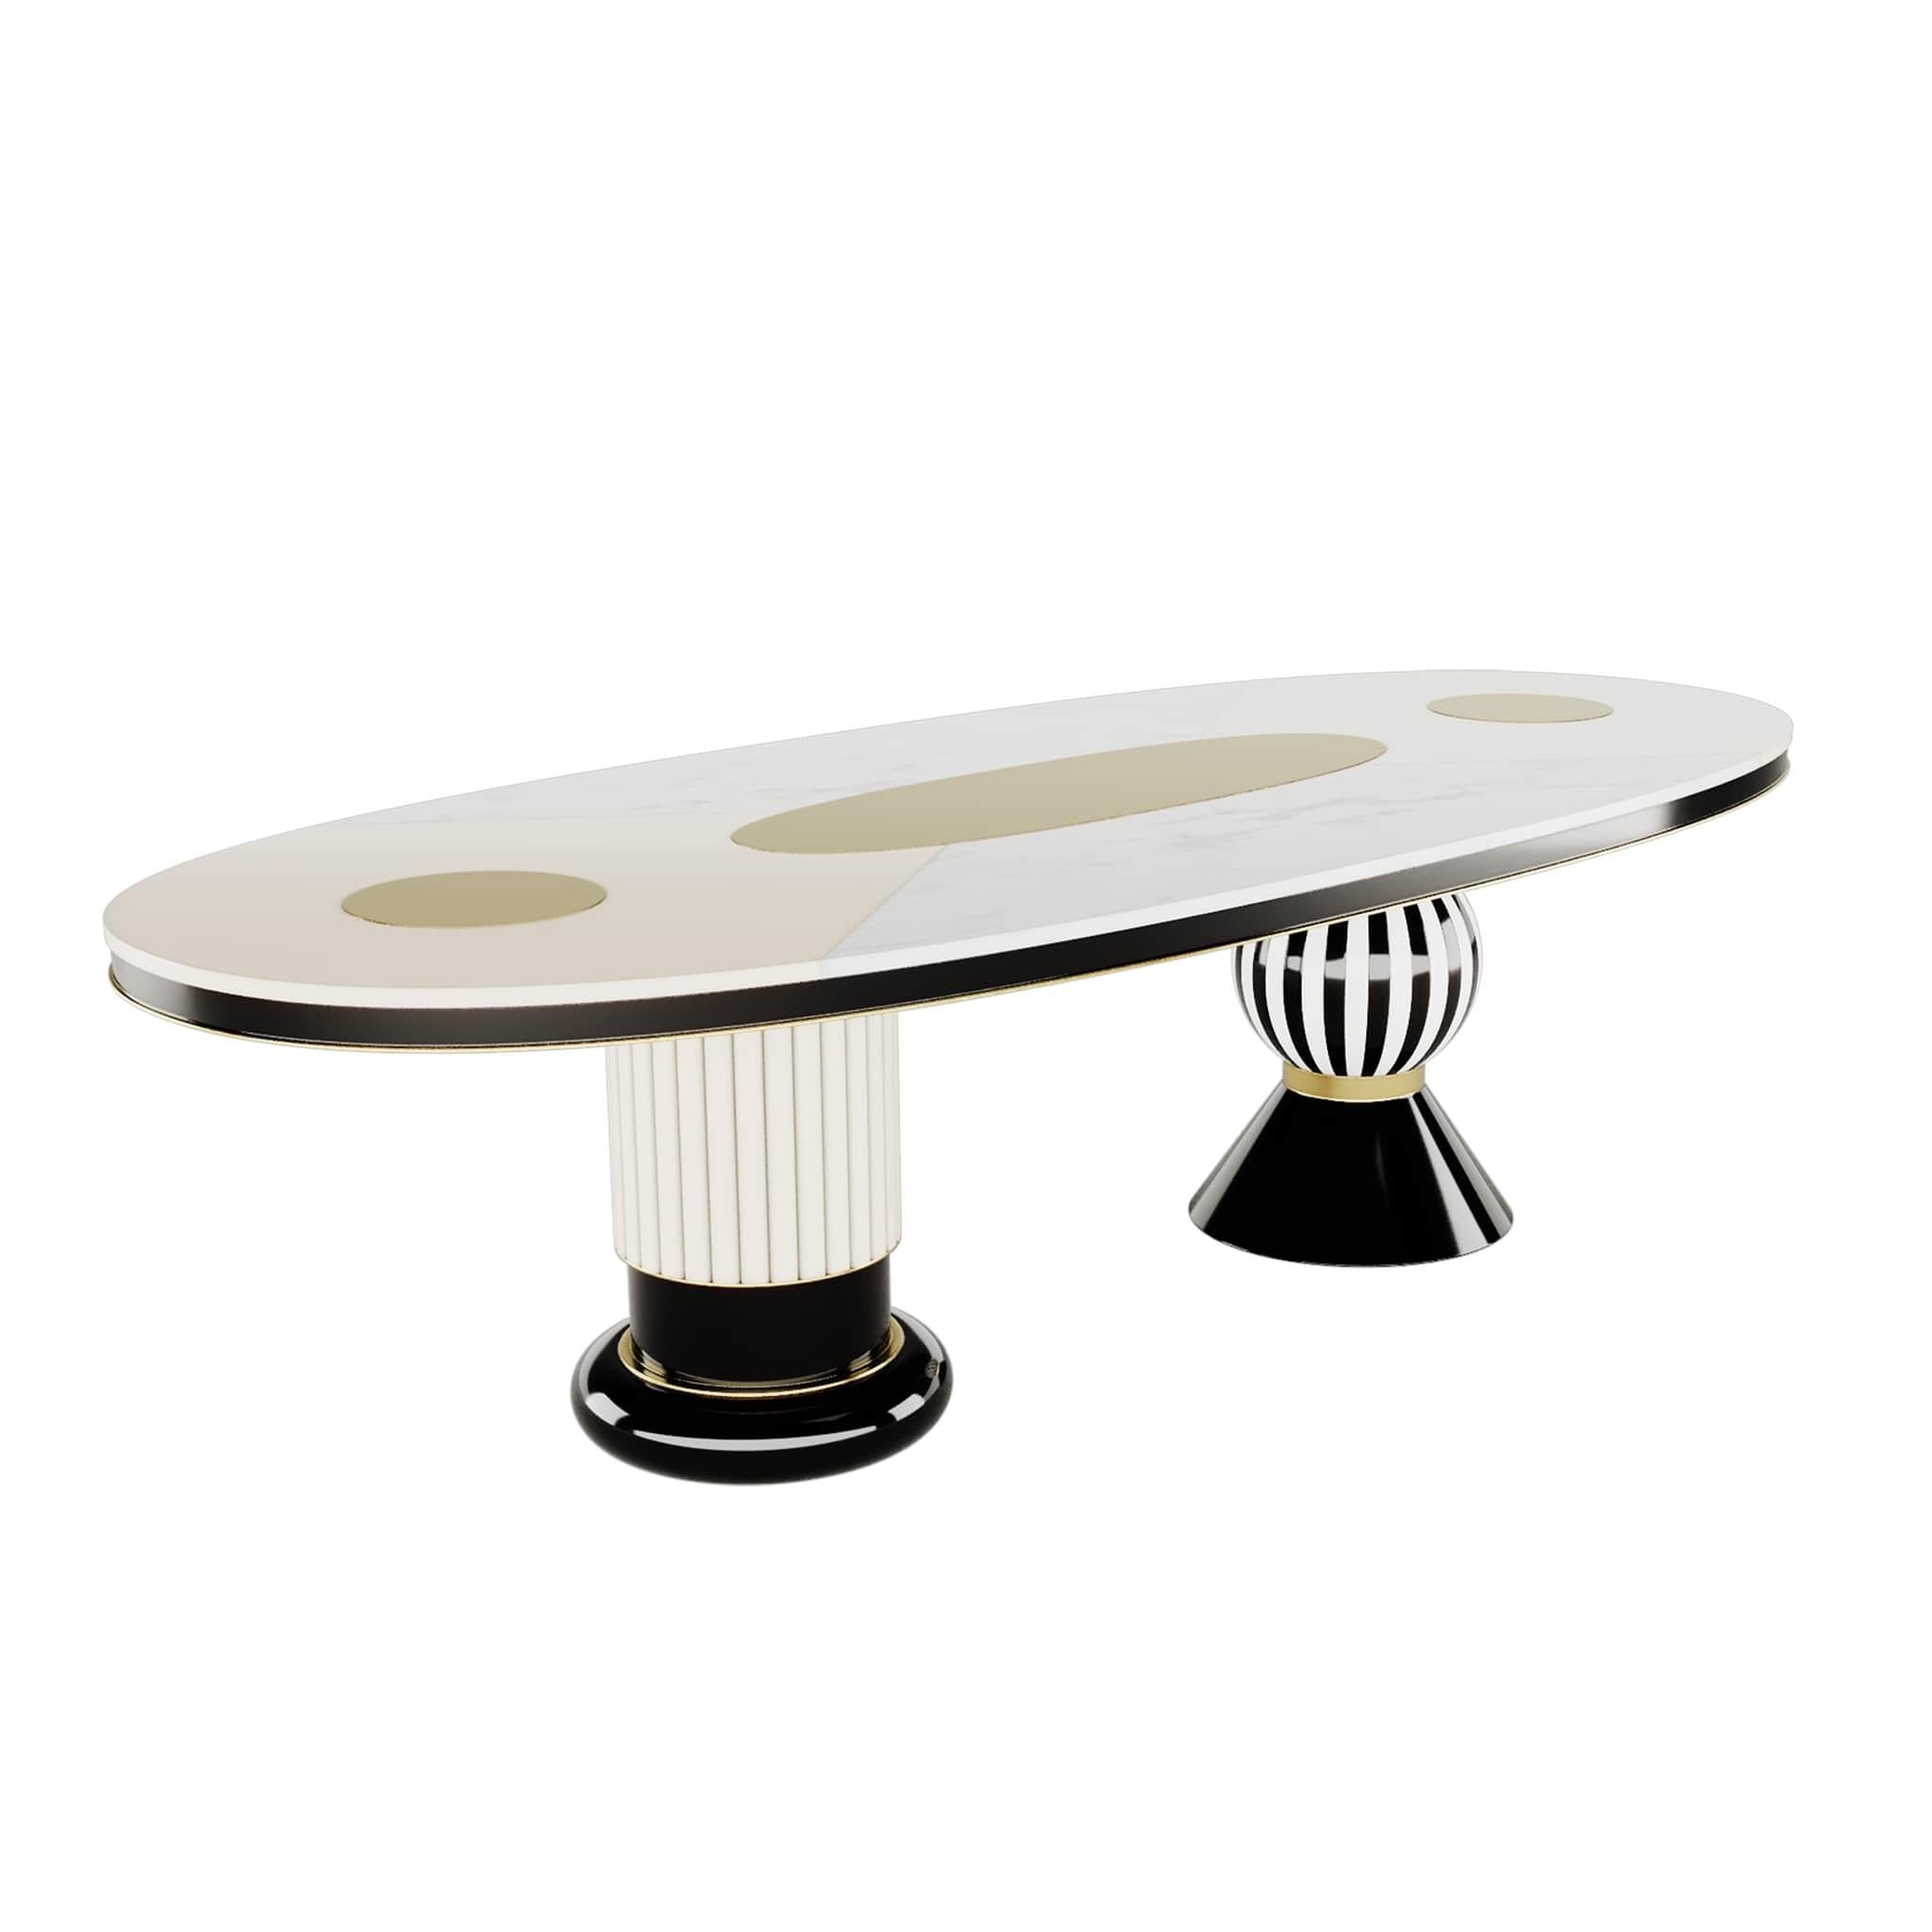 Modern Oval Dining Table Black & White Top, Gold Stainless Steel Details   Fuschia dining table
Fuschia dining table is a revivalism of the Memphis style’s charm and charisma. A white wood leaf top dining table with an accent design personality that